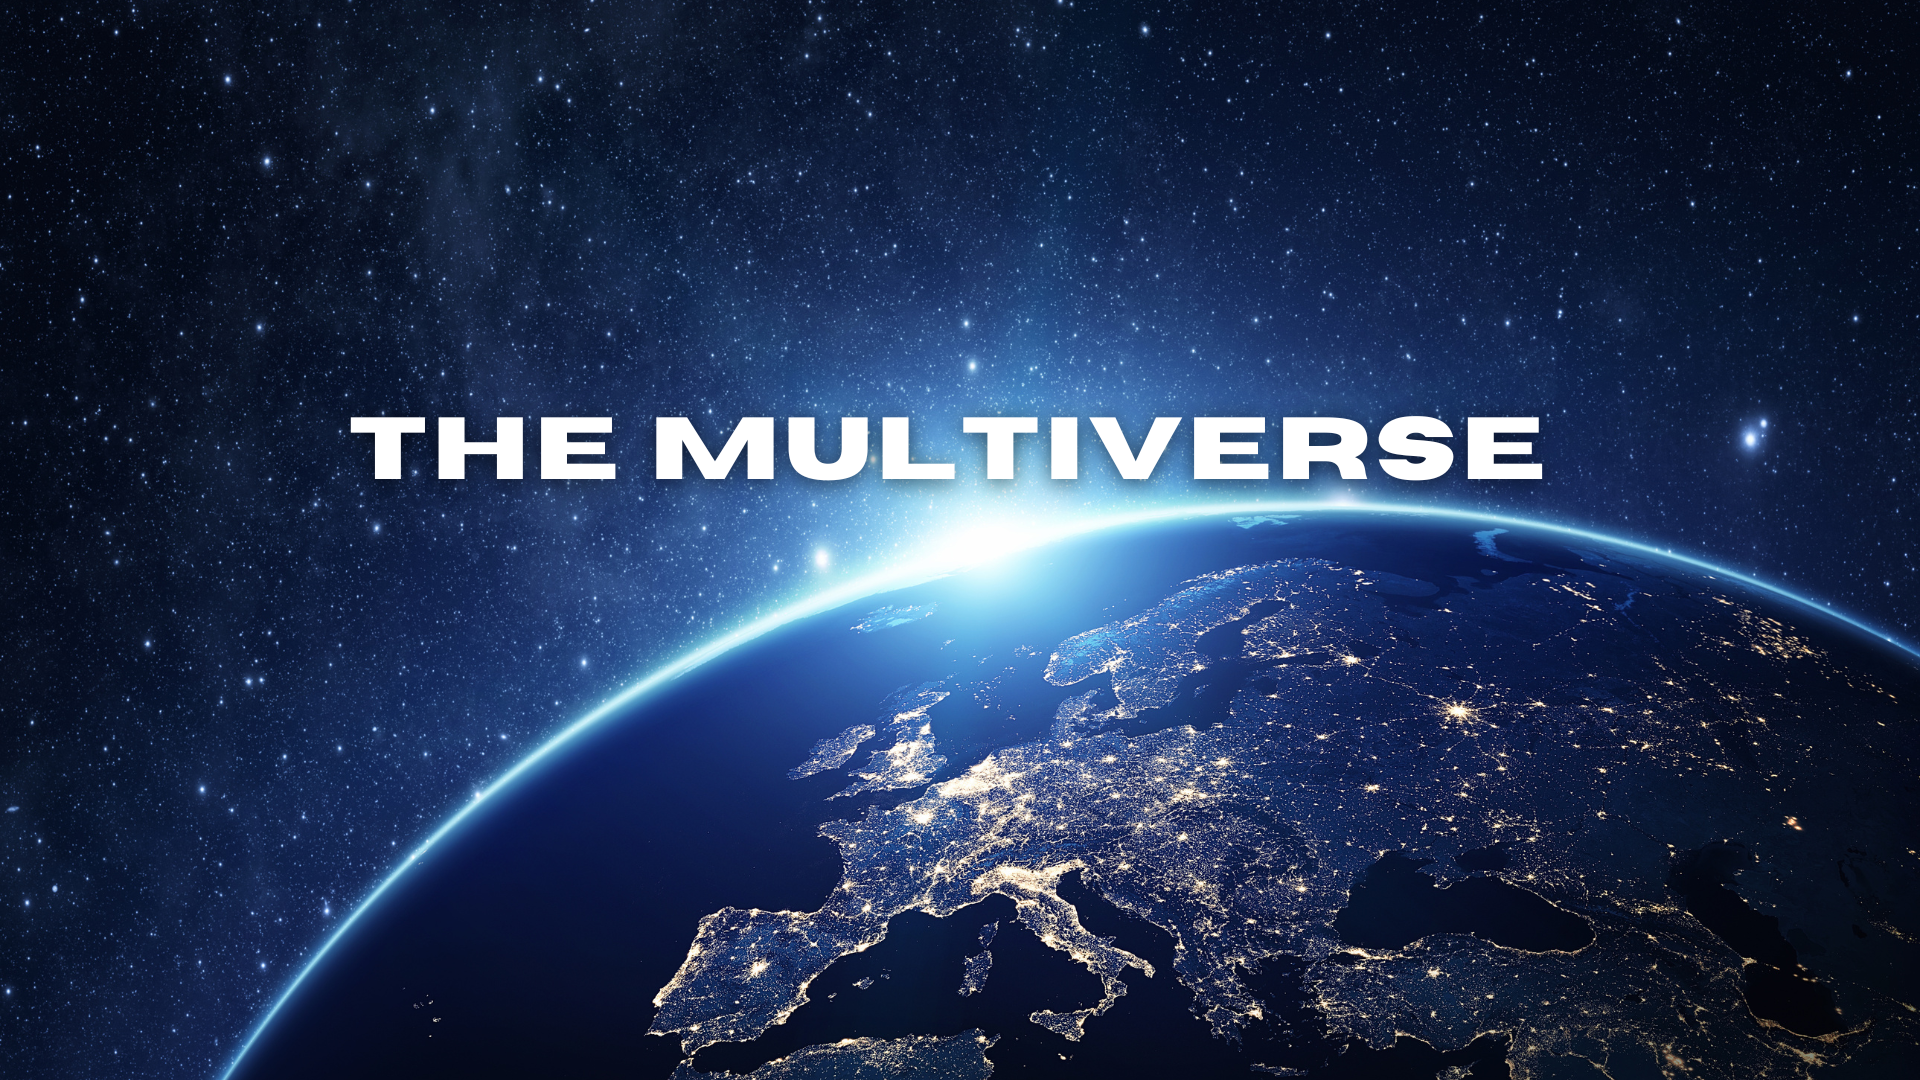 The Multiverse Theory